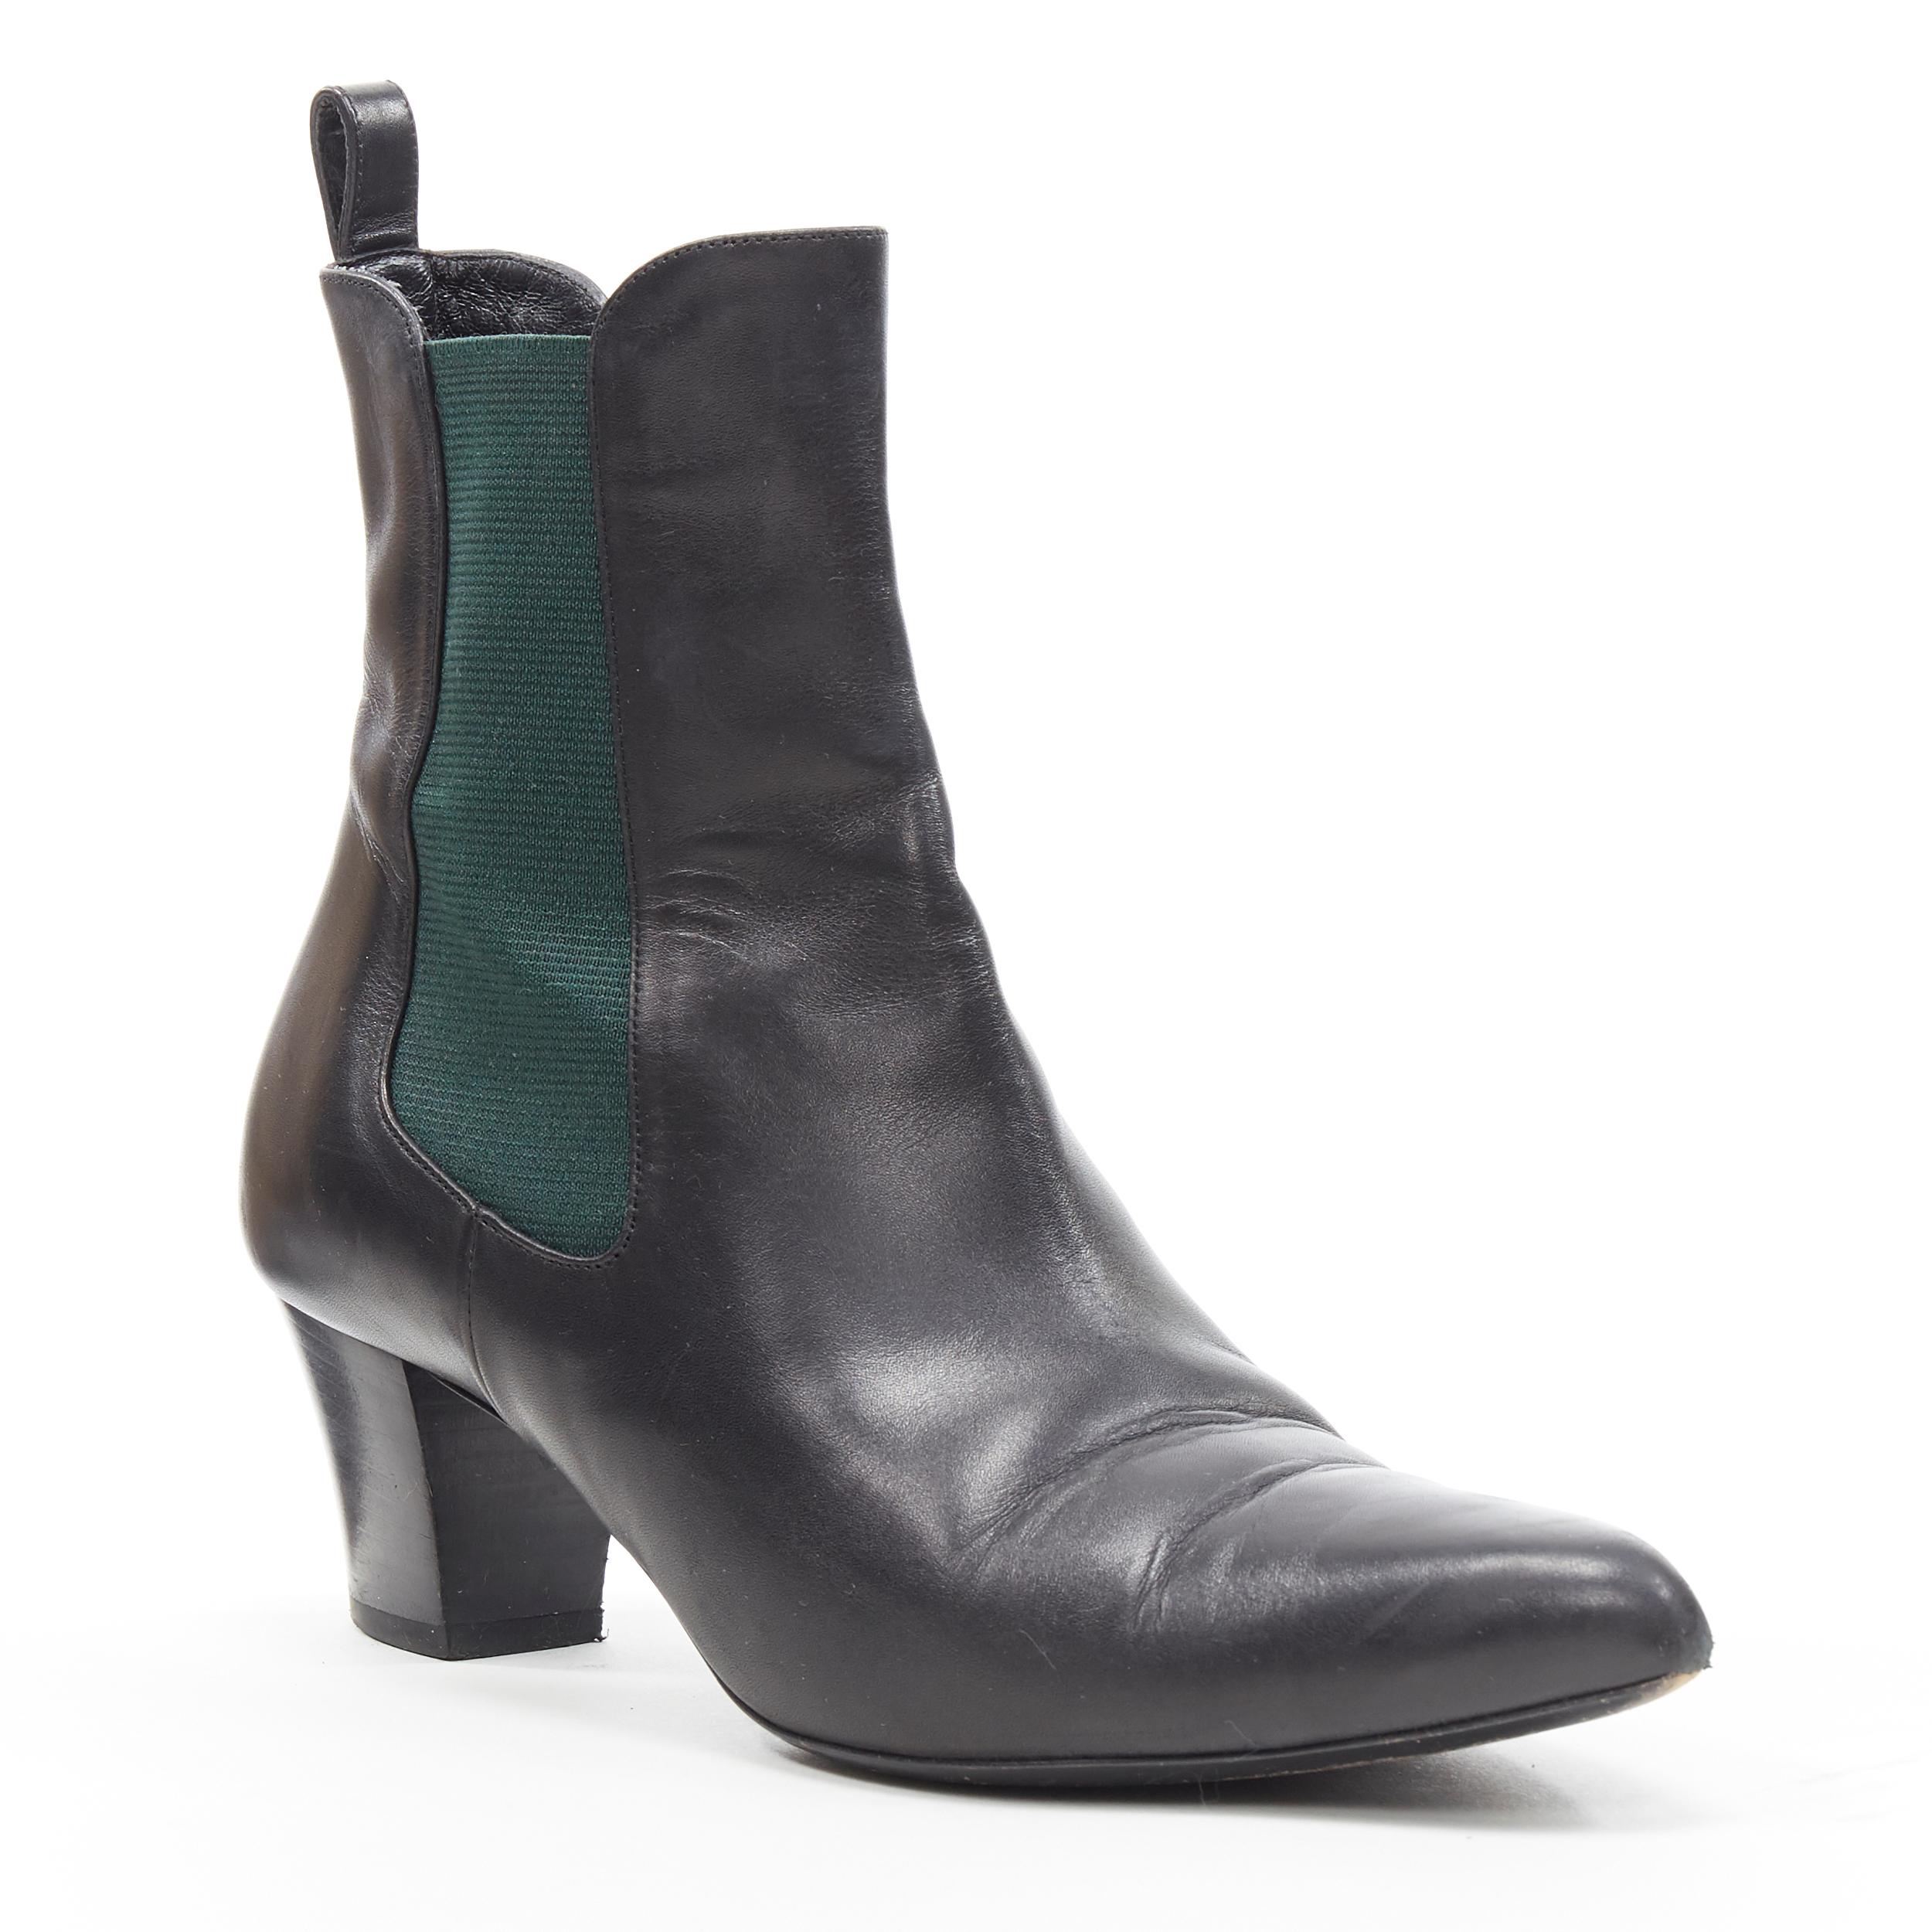 GUCCI black leather green elastic gusset pointed toe block heel ankle boot EU38 
Brand: Gucci
Model Name / Style: Ankle boot
Material: Leather
Color: Black
Pattern: Solid
Closure: Pull on
Extra Detail: Green gusset. Loop detail.
Made in: